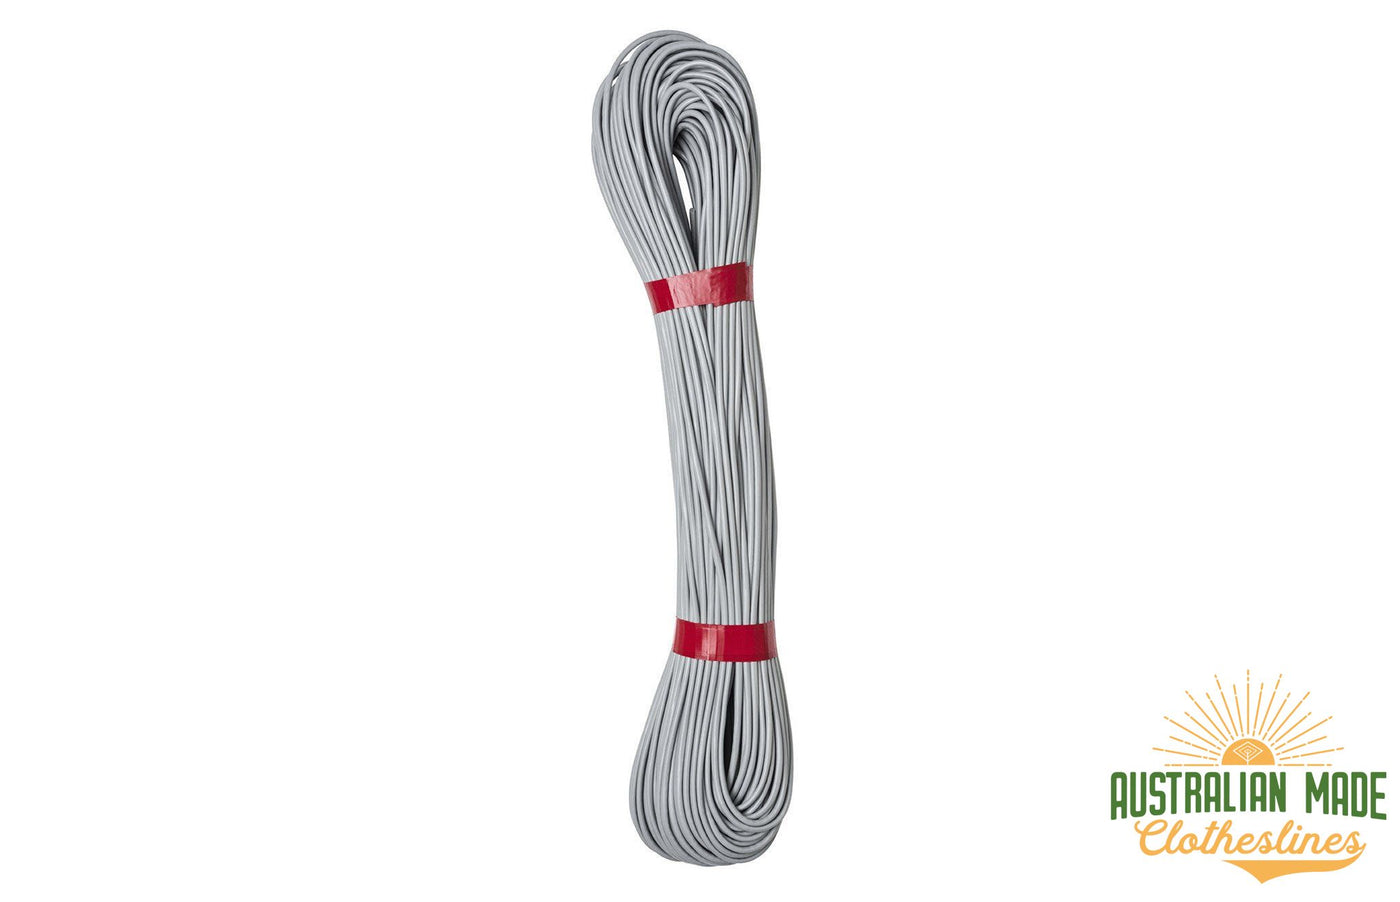 Austral 60m Clothesline Cord - Grey unwrapped - Australian Made Clotheslines